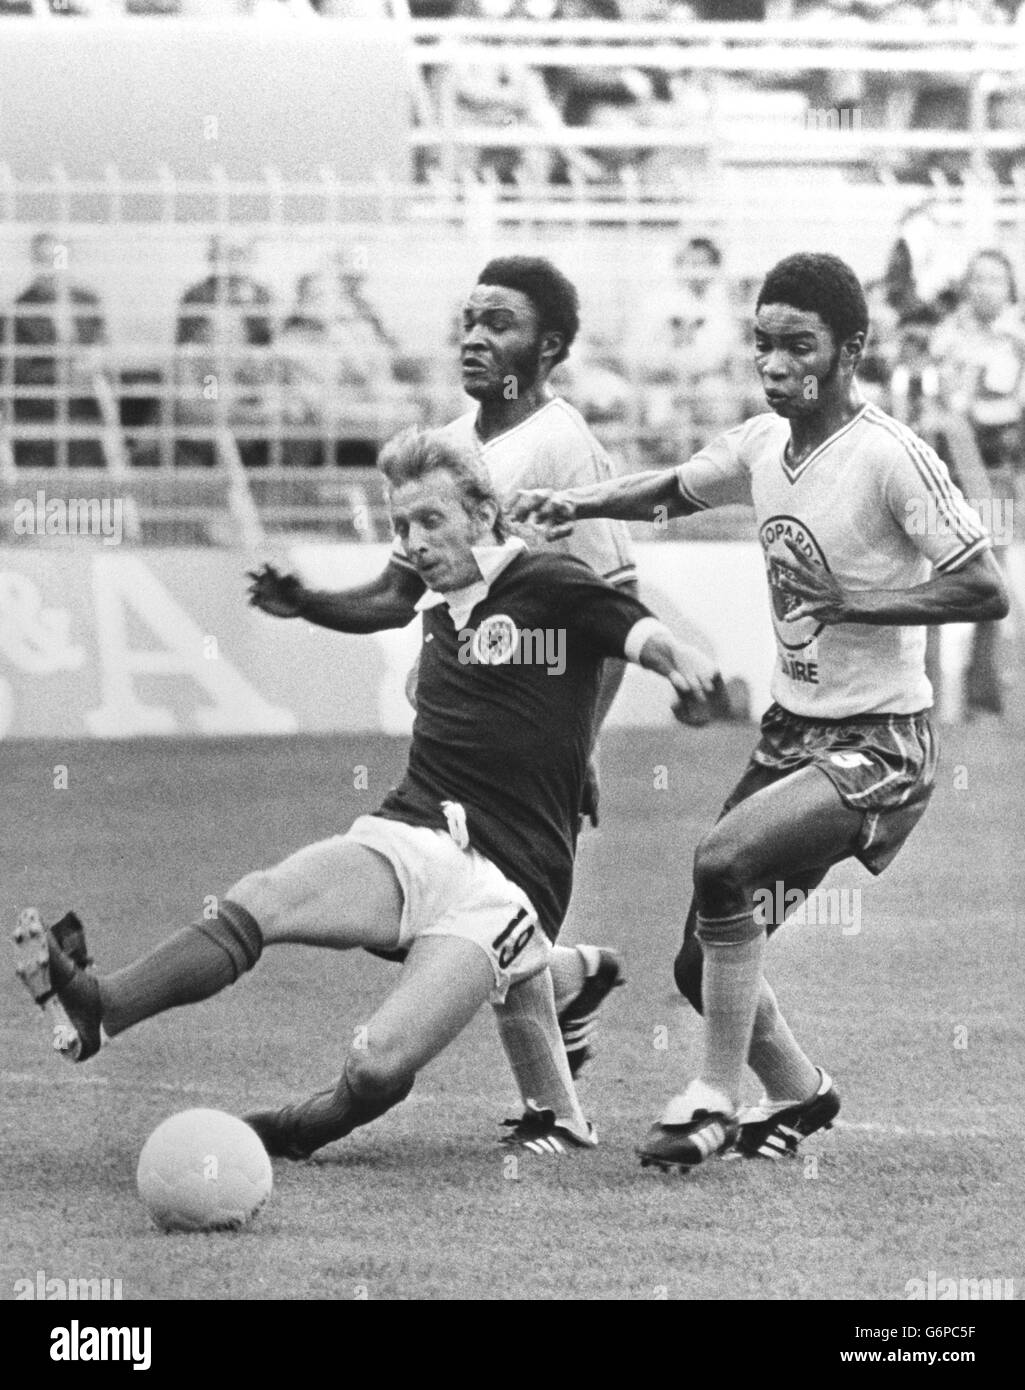 Scotland's Denis Law (dark shirt) breaks through Zaire's Boba Lobilo and Buhanga during the Group Two World Cup match at the Westfalenstadion in Dortmund. The match ended as a 2-1 victory for Scotland, with goals from Peter Lorimer and Joe Jordan. Stock Photo